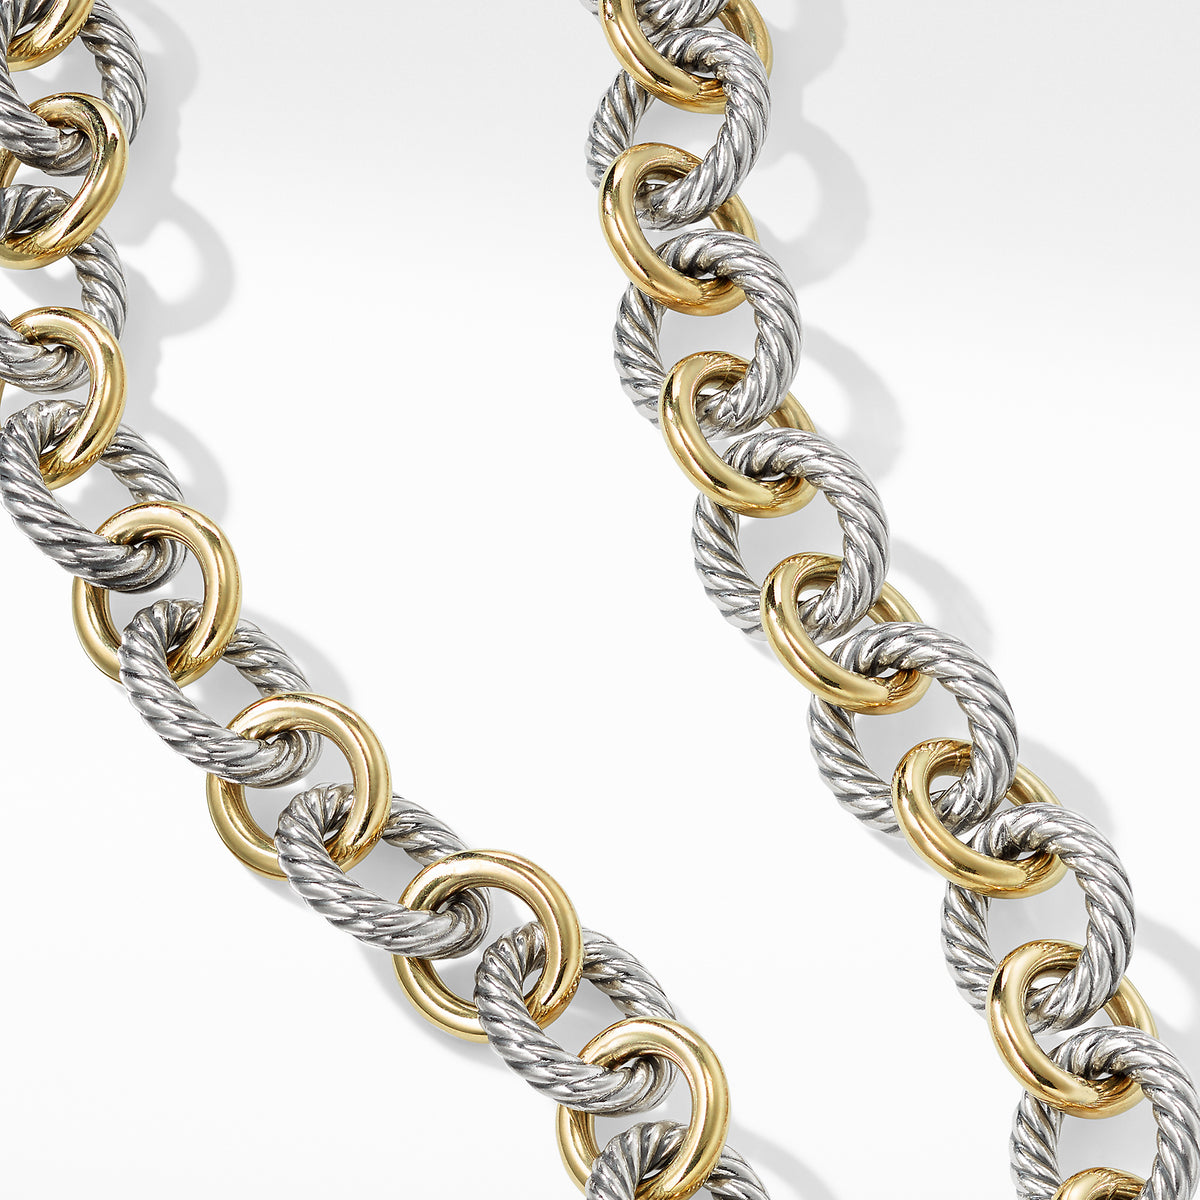 Chain Necklace with 18K Gold